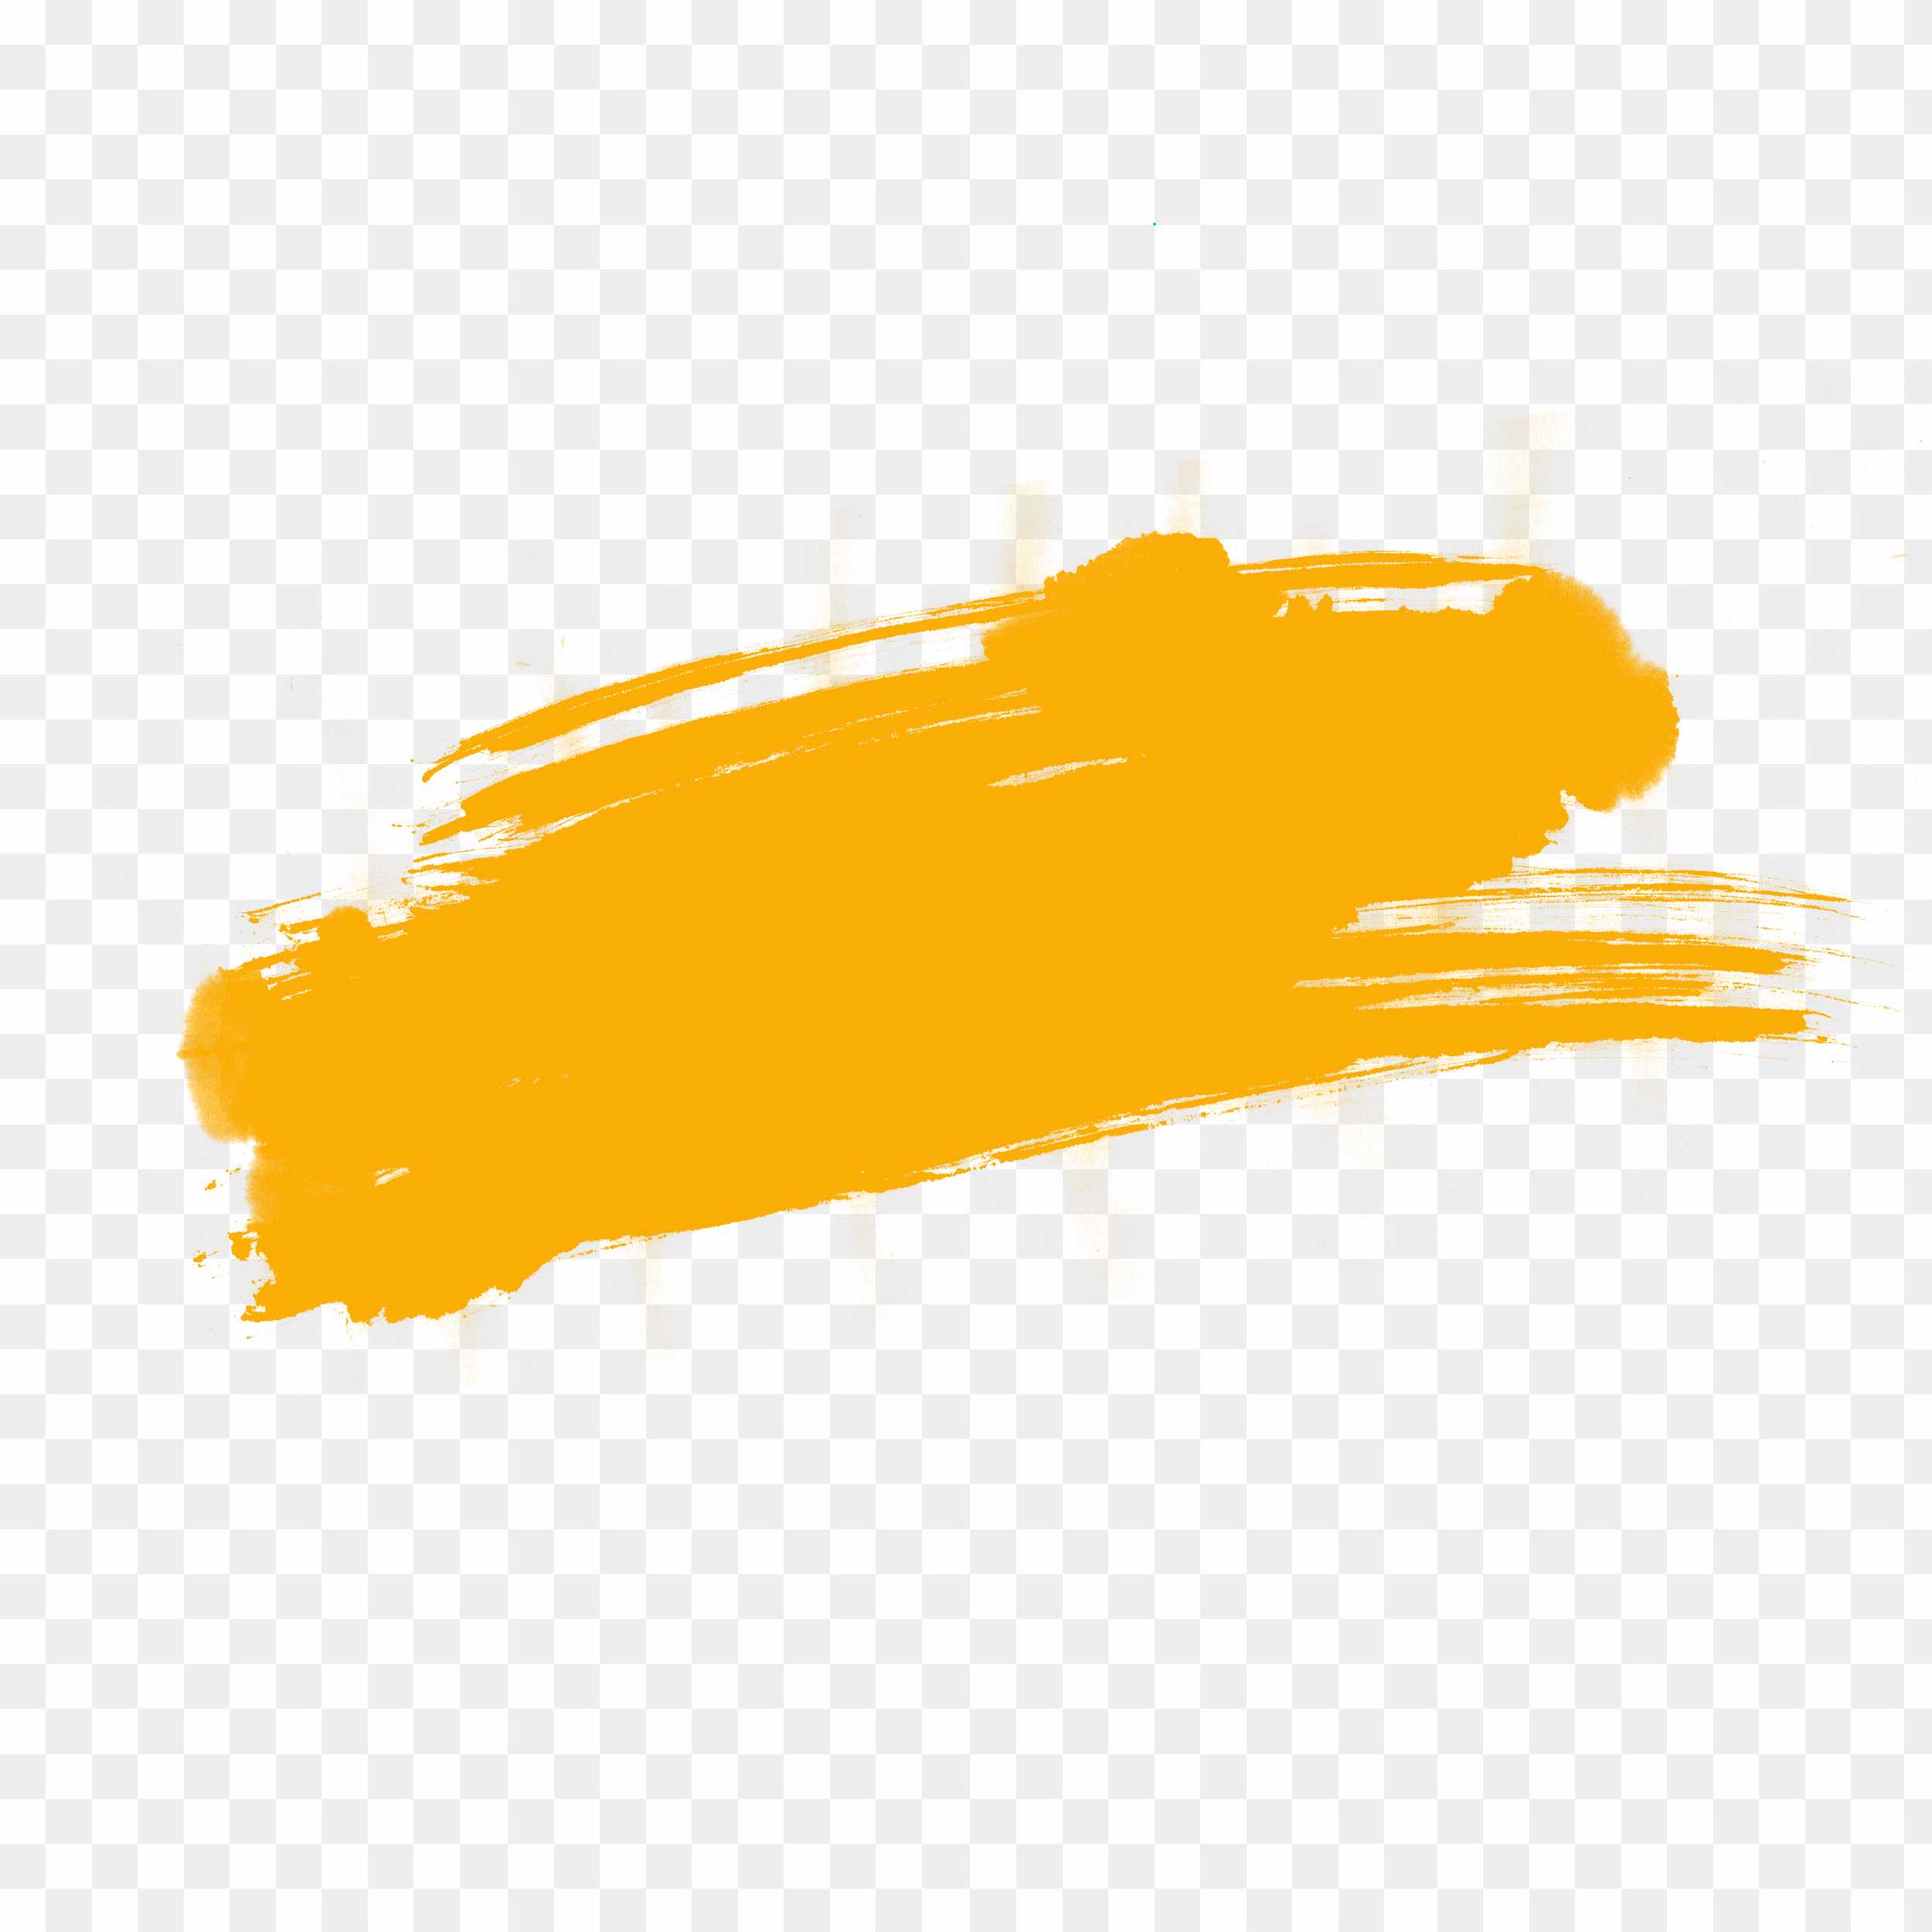 Yellow brush PNG images